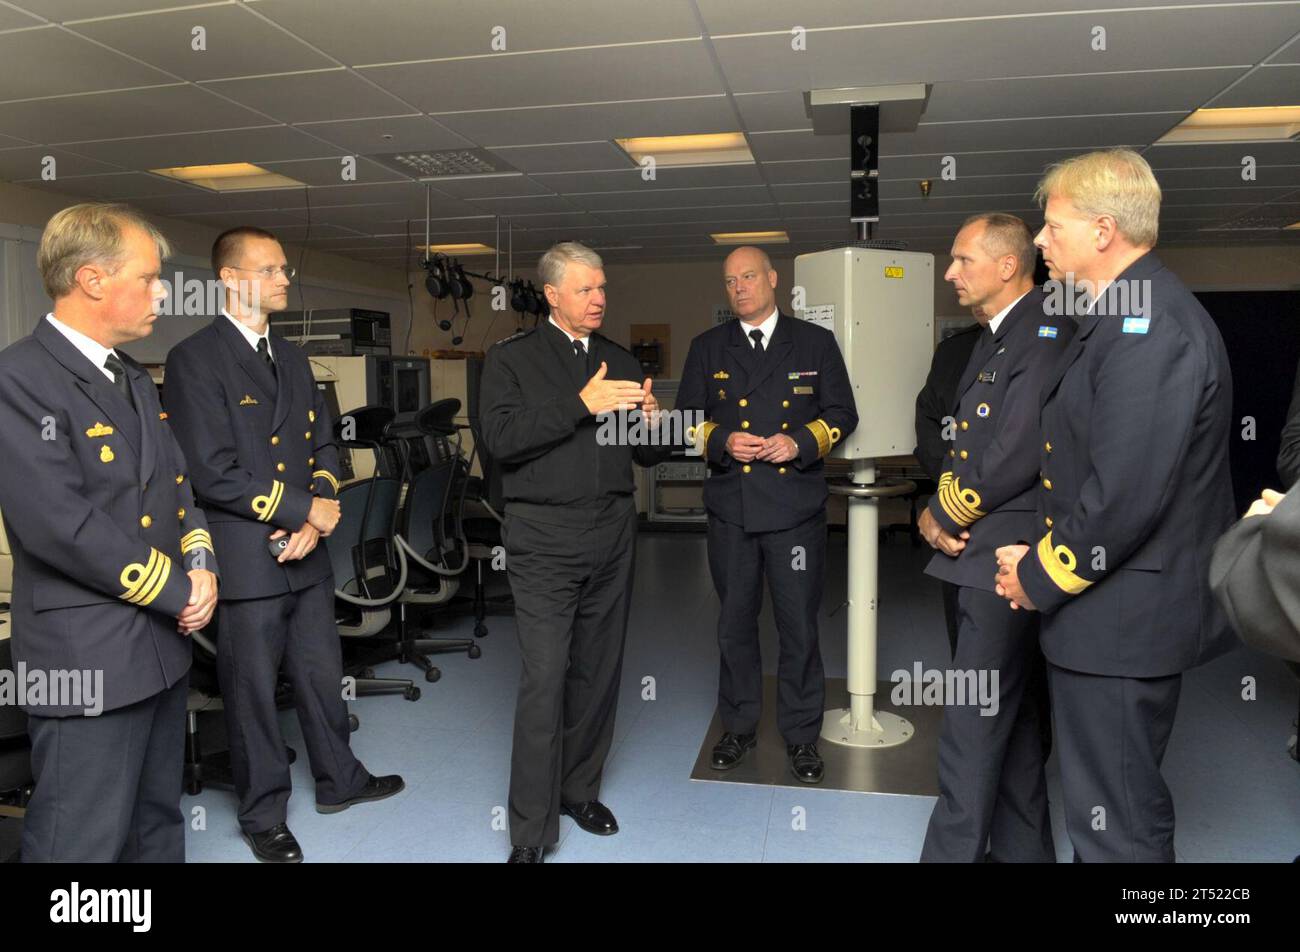 1008198273J-033  KARLSKRONA, Sweden (Aug. 19, 2010) Chief of Naval Operations (CNO) Adm. Gary Roughead, middle, meets with Rear Adm.  Anders Grenstad, Chief of Staff of the Royal Swedish Navy and other Swedish naval leadership while touring the Simulators and Training facility at Naval Base Karlskrona Naval Base. Navy Stock Photo